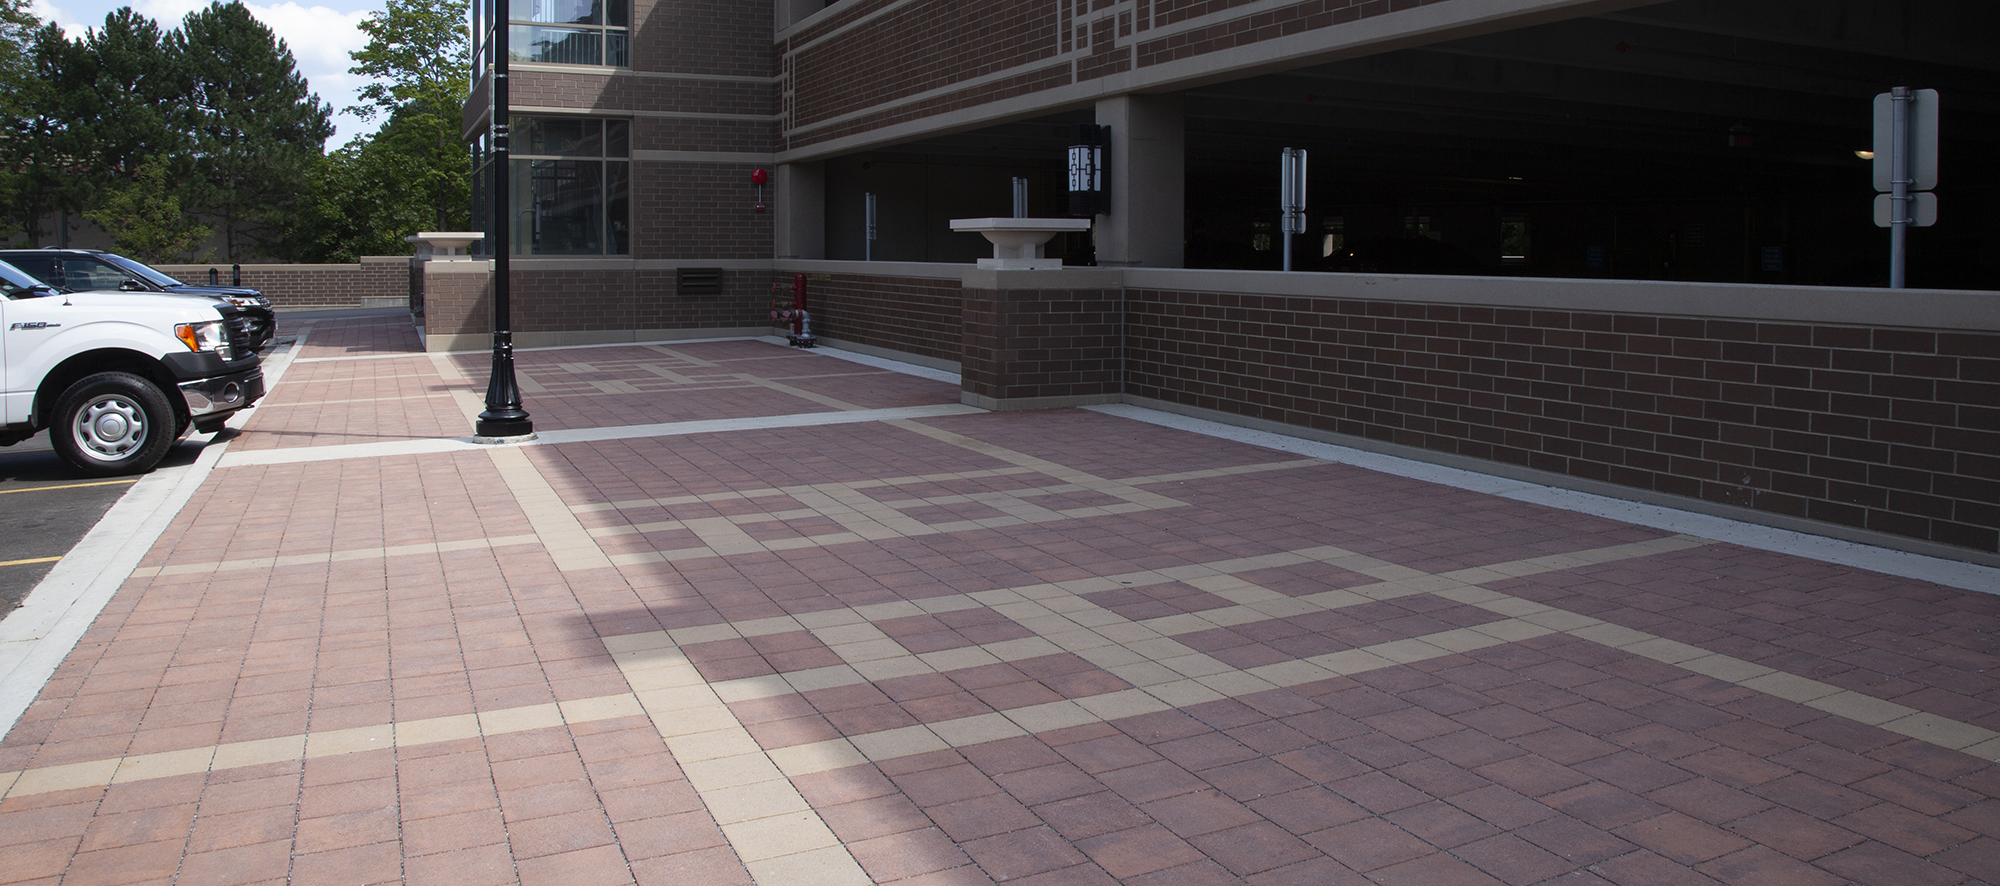 Red and beige Eco-Priora pavers form unique, shapely patterns against the red brick exterior of the enclosed parking lot.